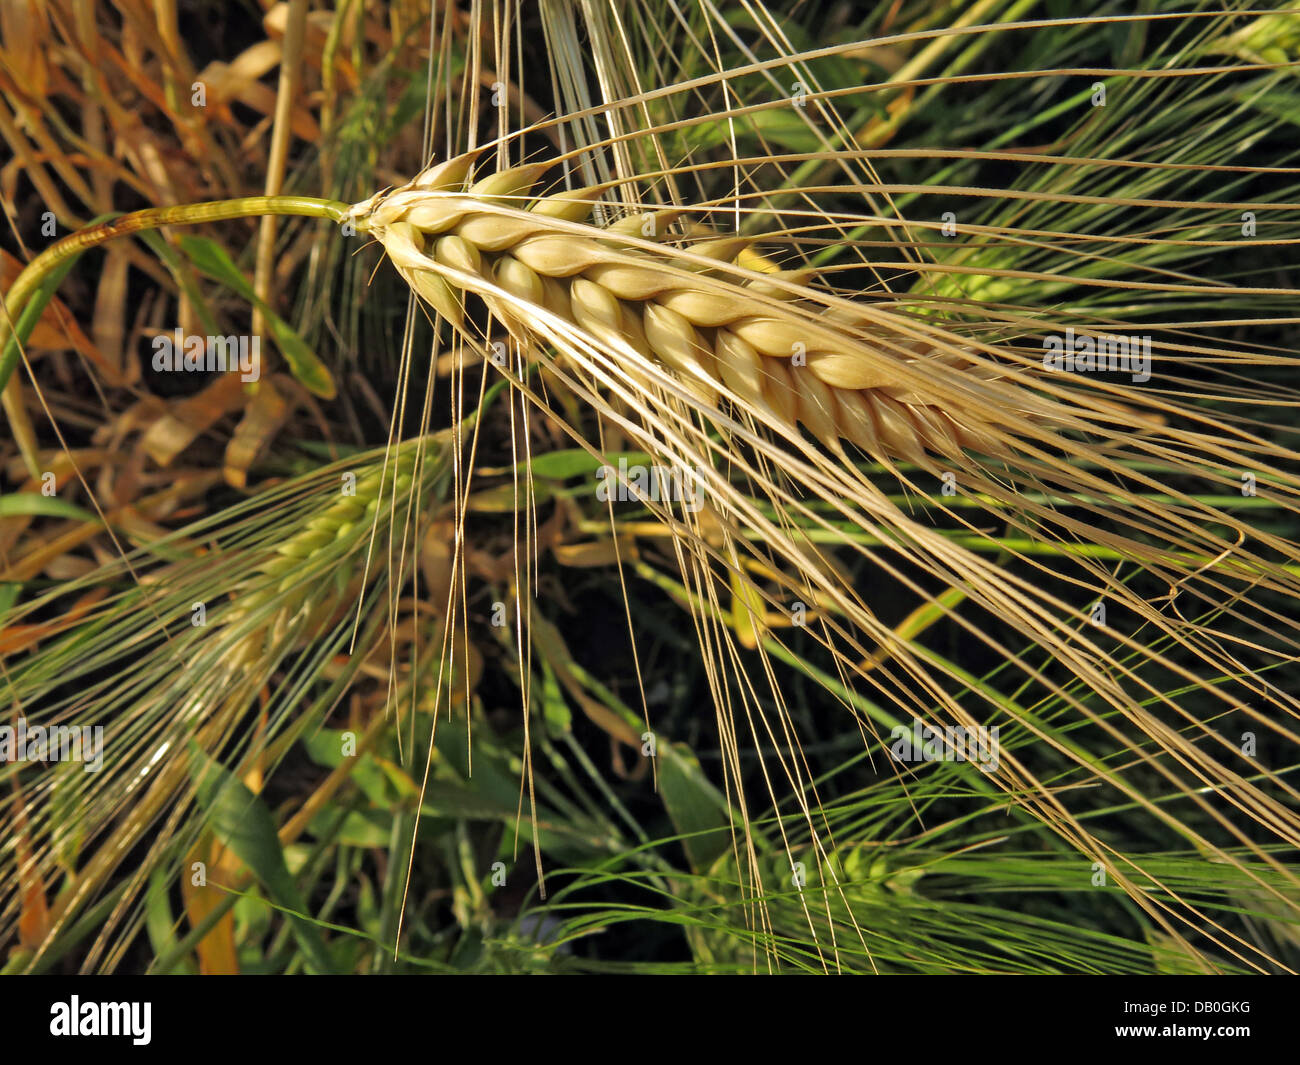 Wheat in a field ready for harvest in Grappenhall, Cheshire, NW England, UK Stock Photo